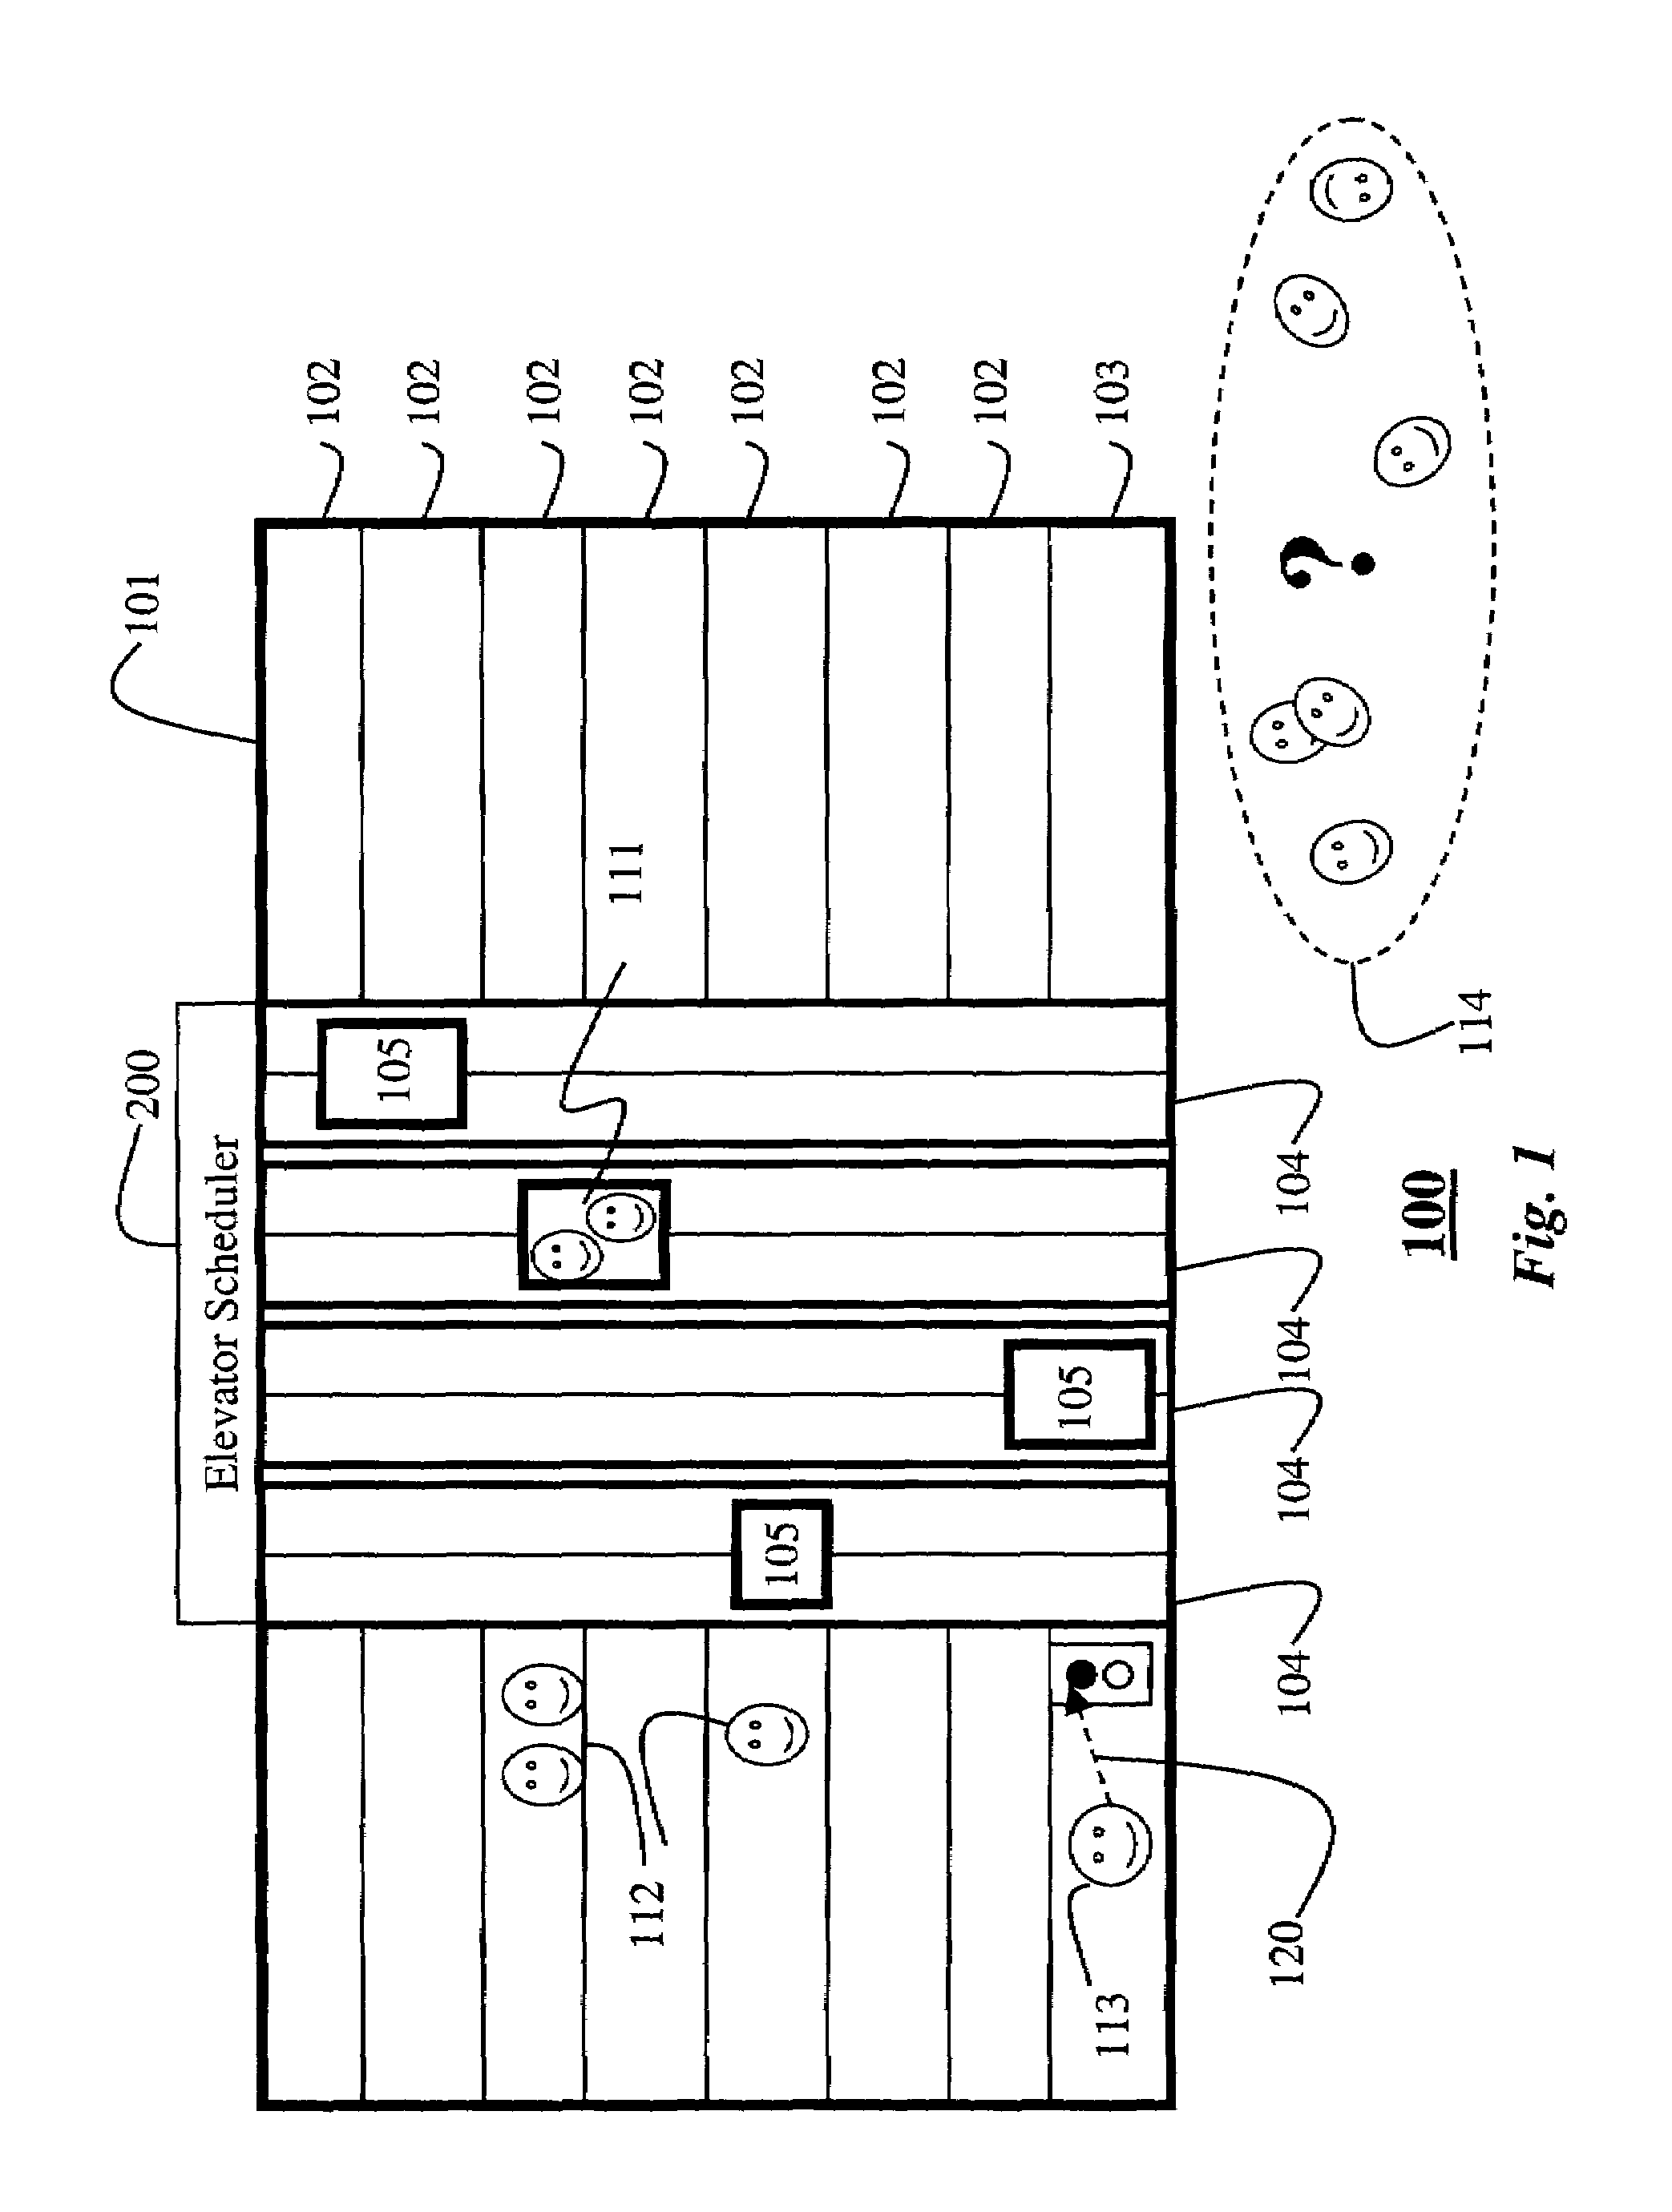 Method and system for scheduling cars in elevator systems considering existing and future passengers